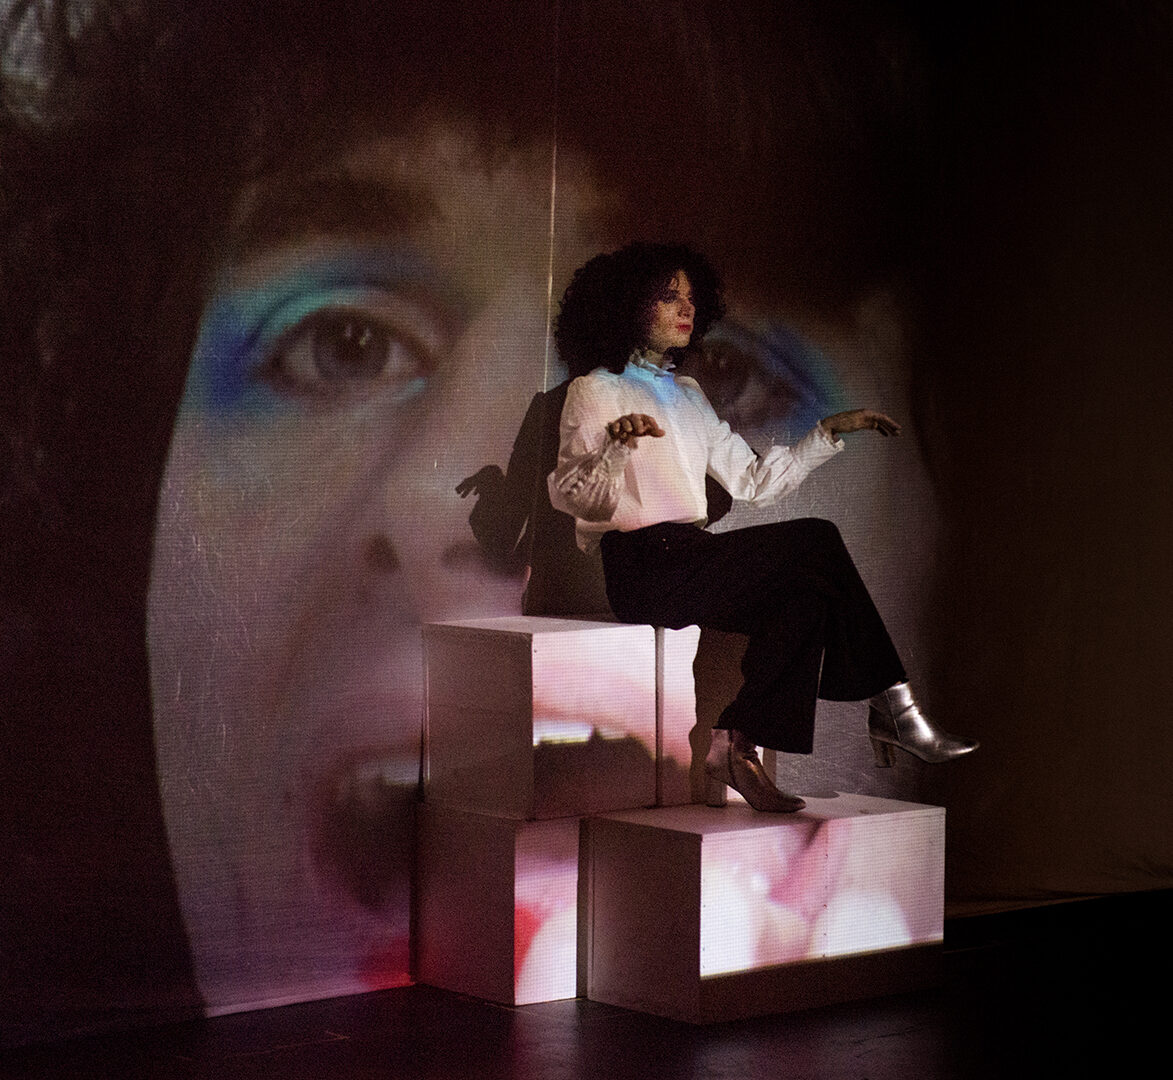 Image of James Knott on stage, sitting on white boxes, with a projected image of their face in the background. James is wearing a white long sleeve blouse, black pants, and shiny silver boots.